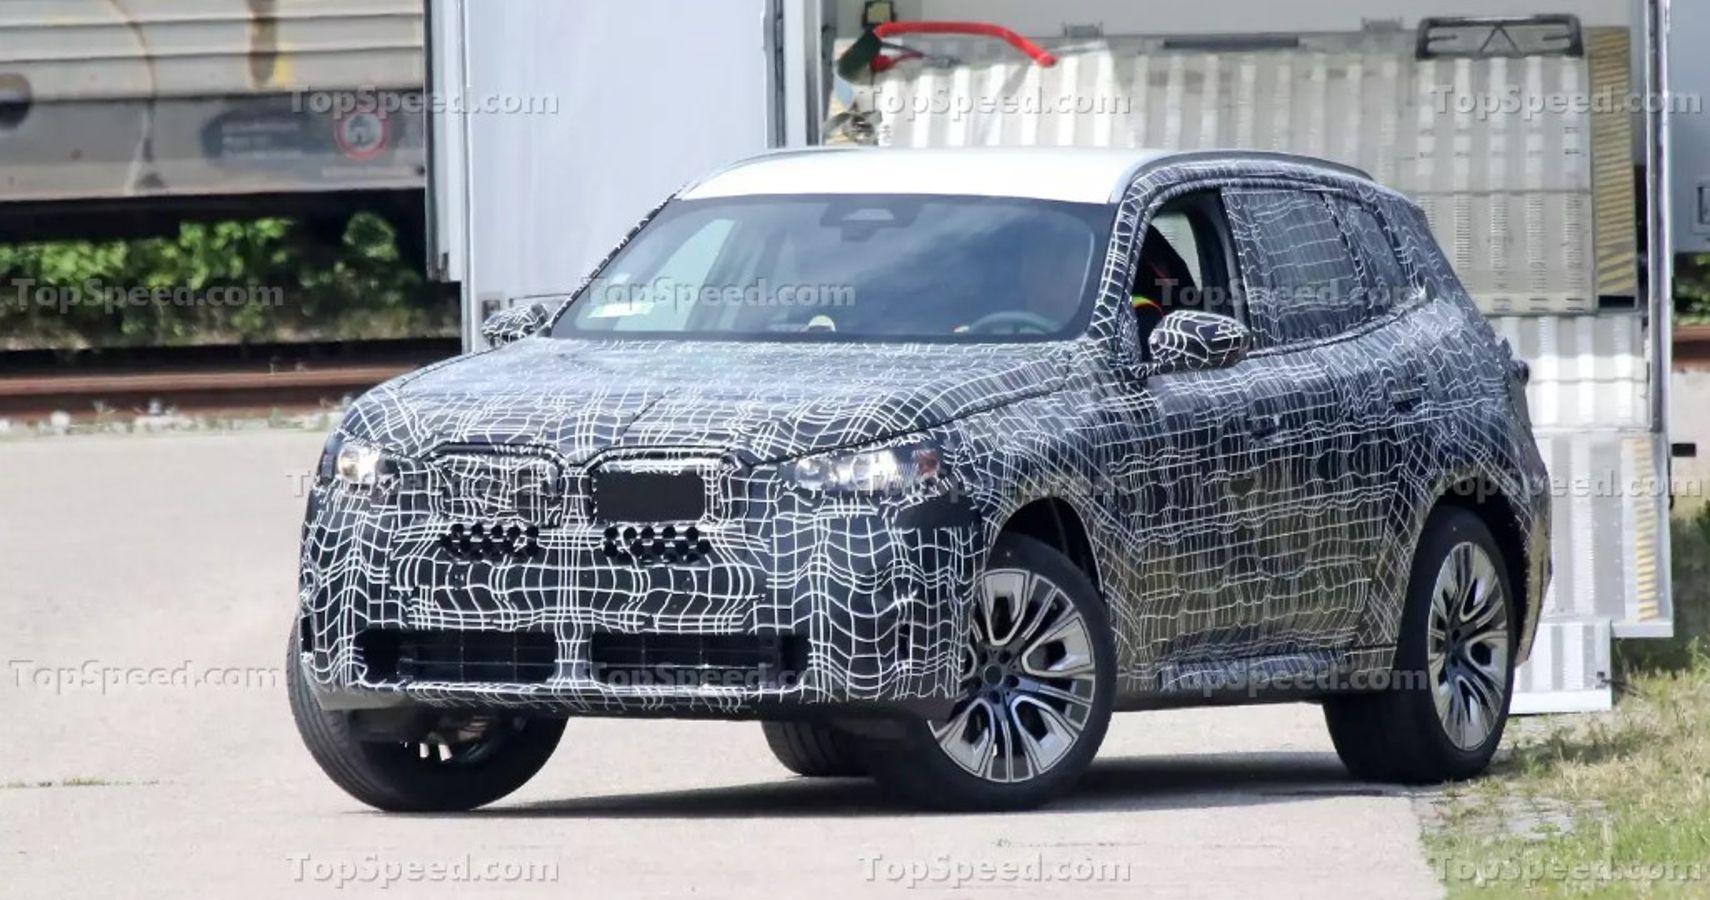 BMW X3 Spy shot camo front and side view